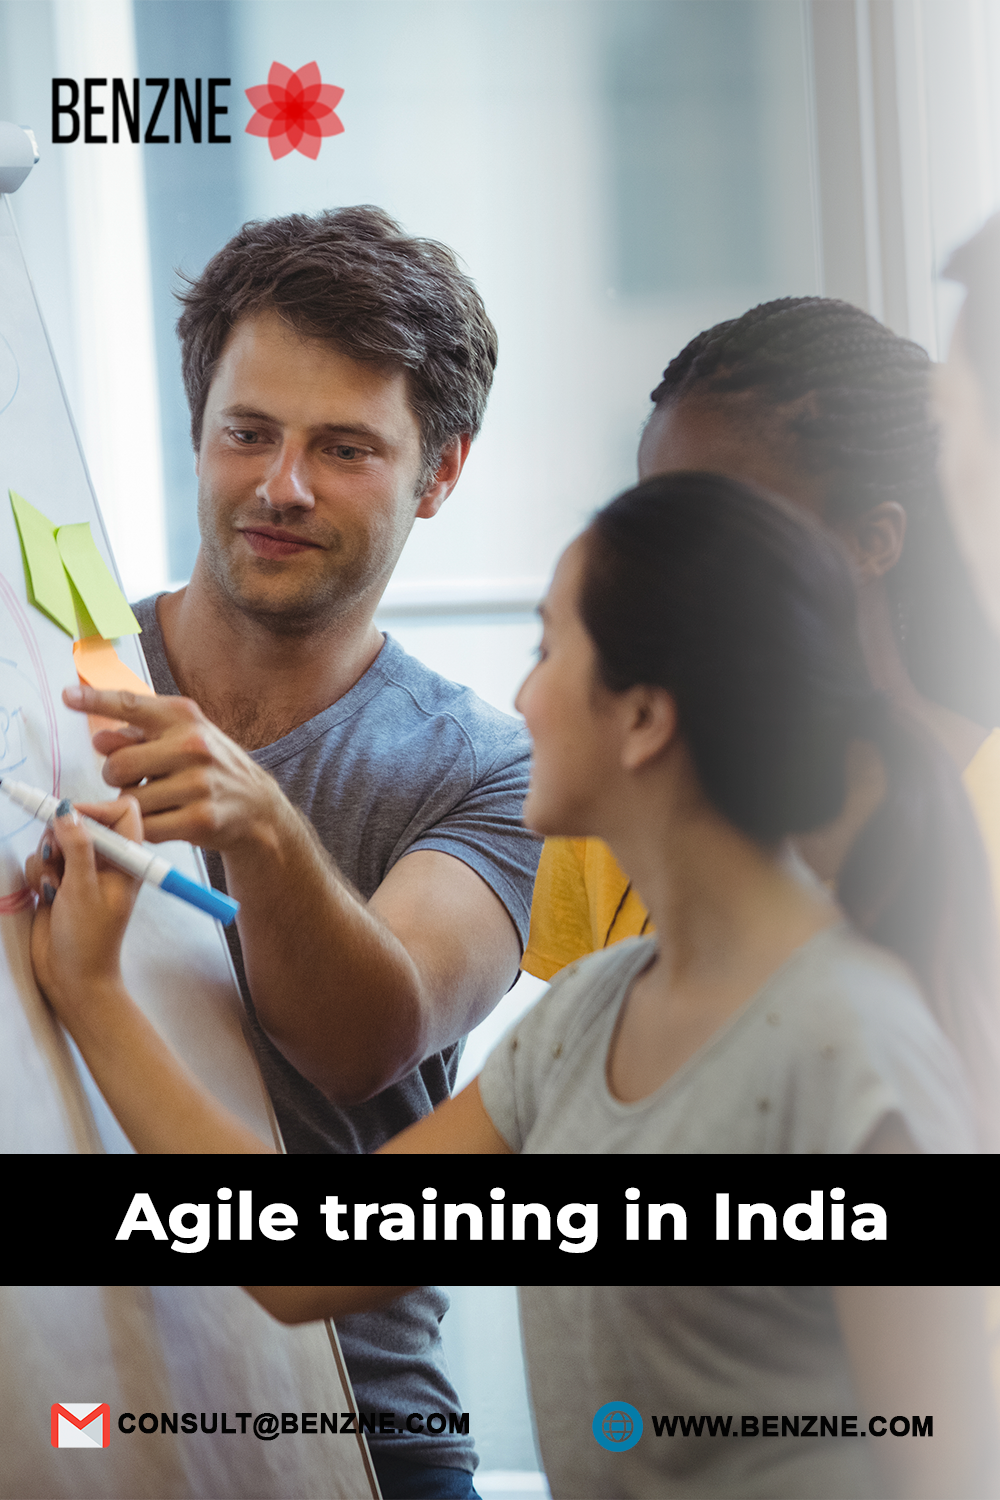 Benzne Consulting: Agile Training in India to help you on your agile journey